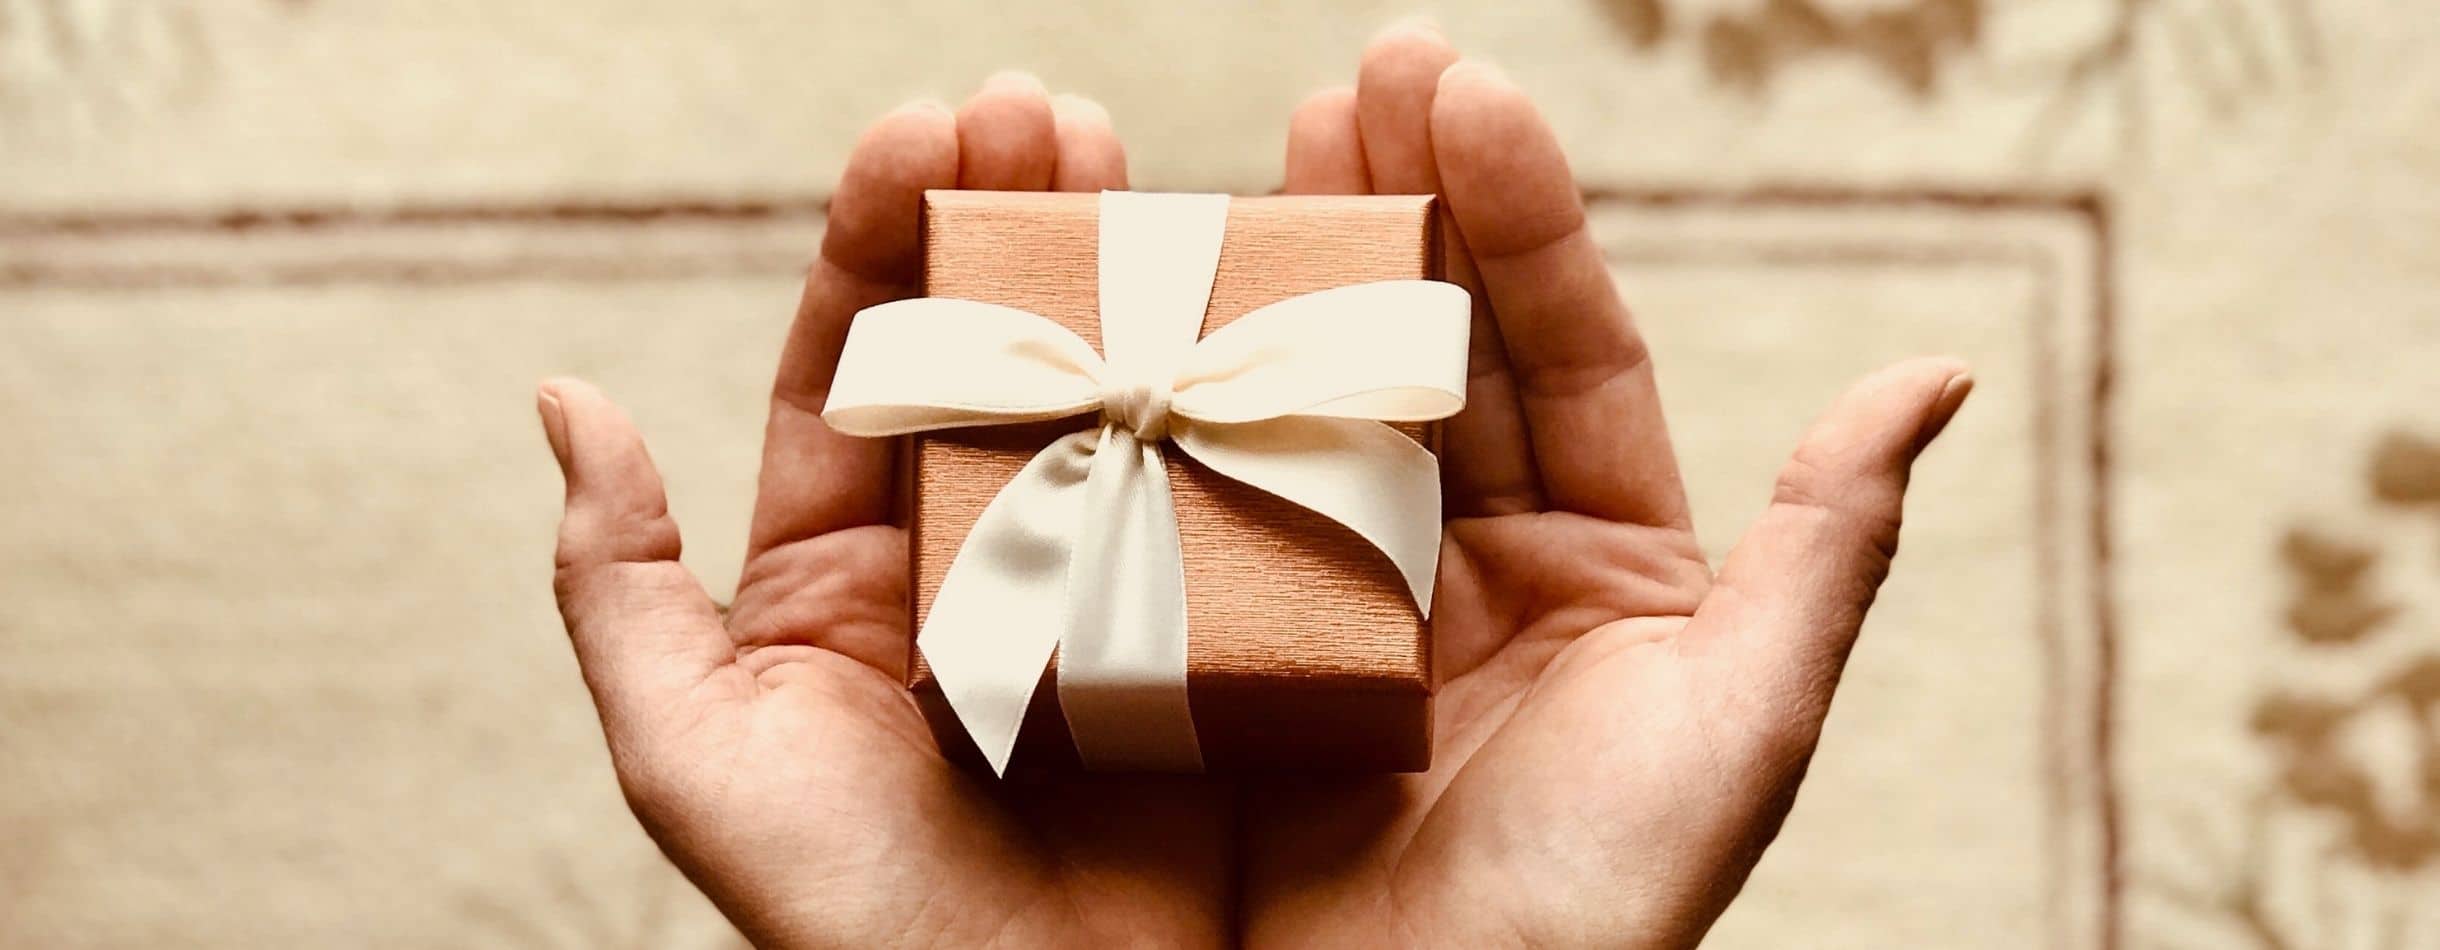 A small orangish-red gift that's wrapped in a tan colored bow lays delicately between two extended hands of a person.